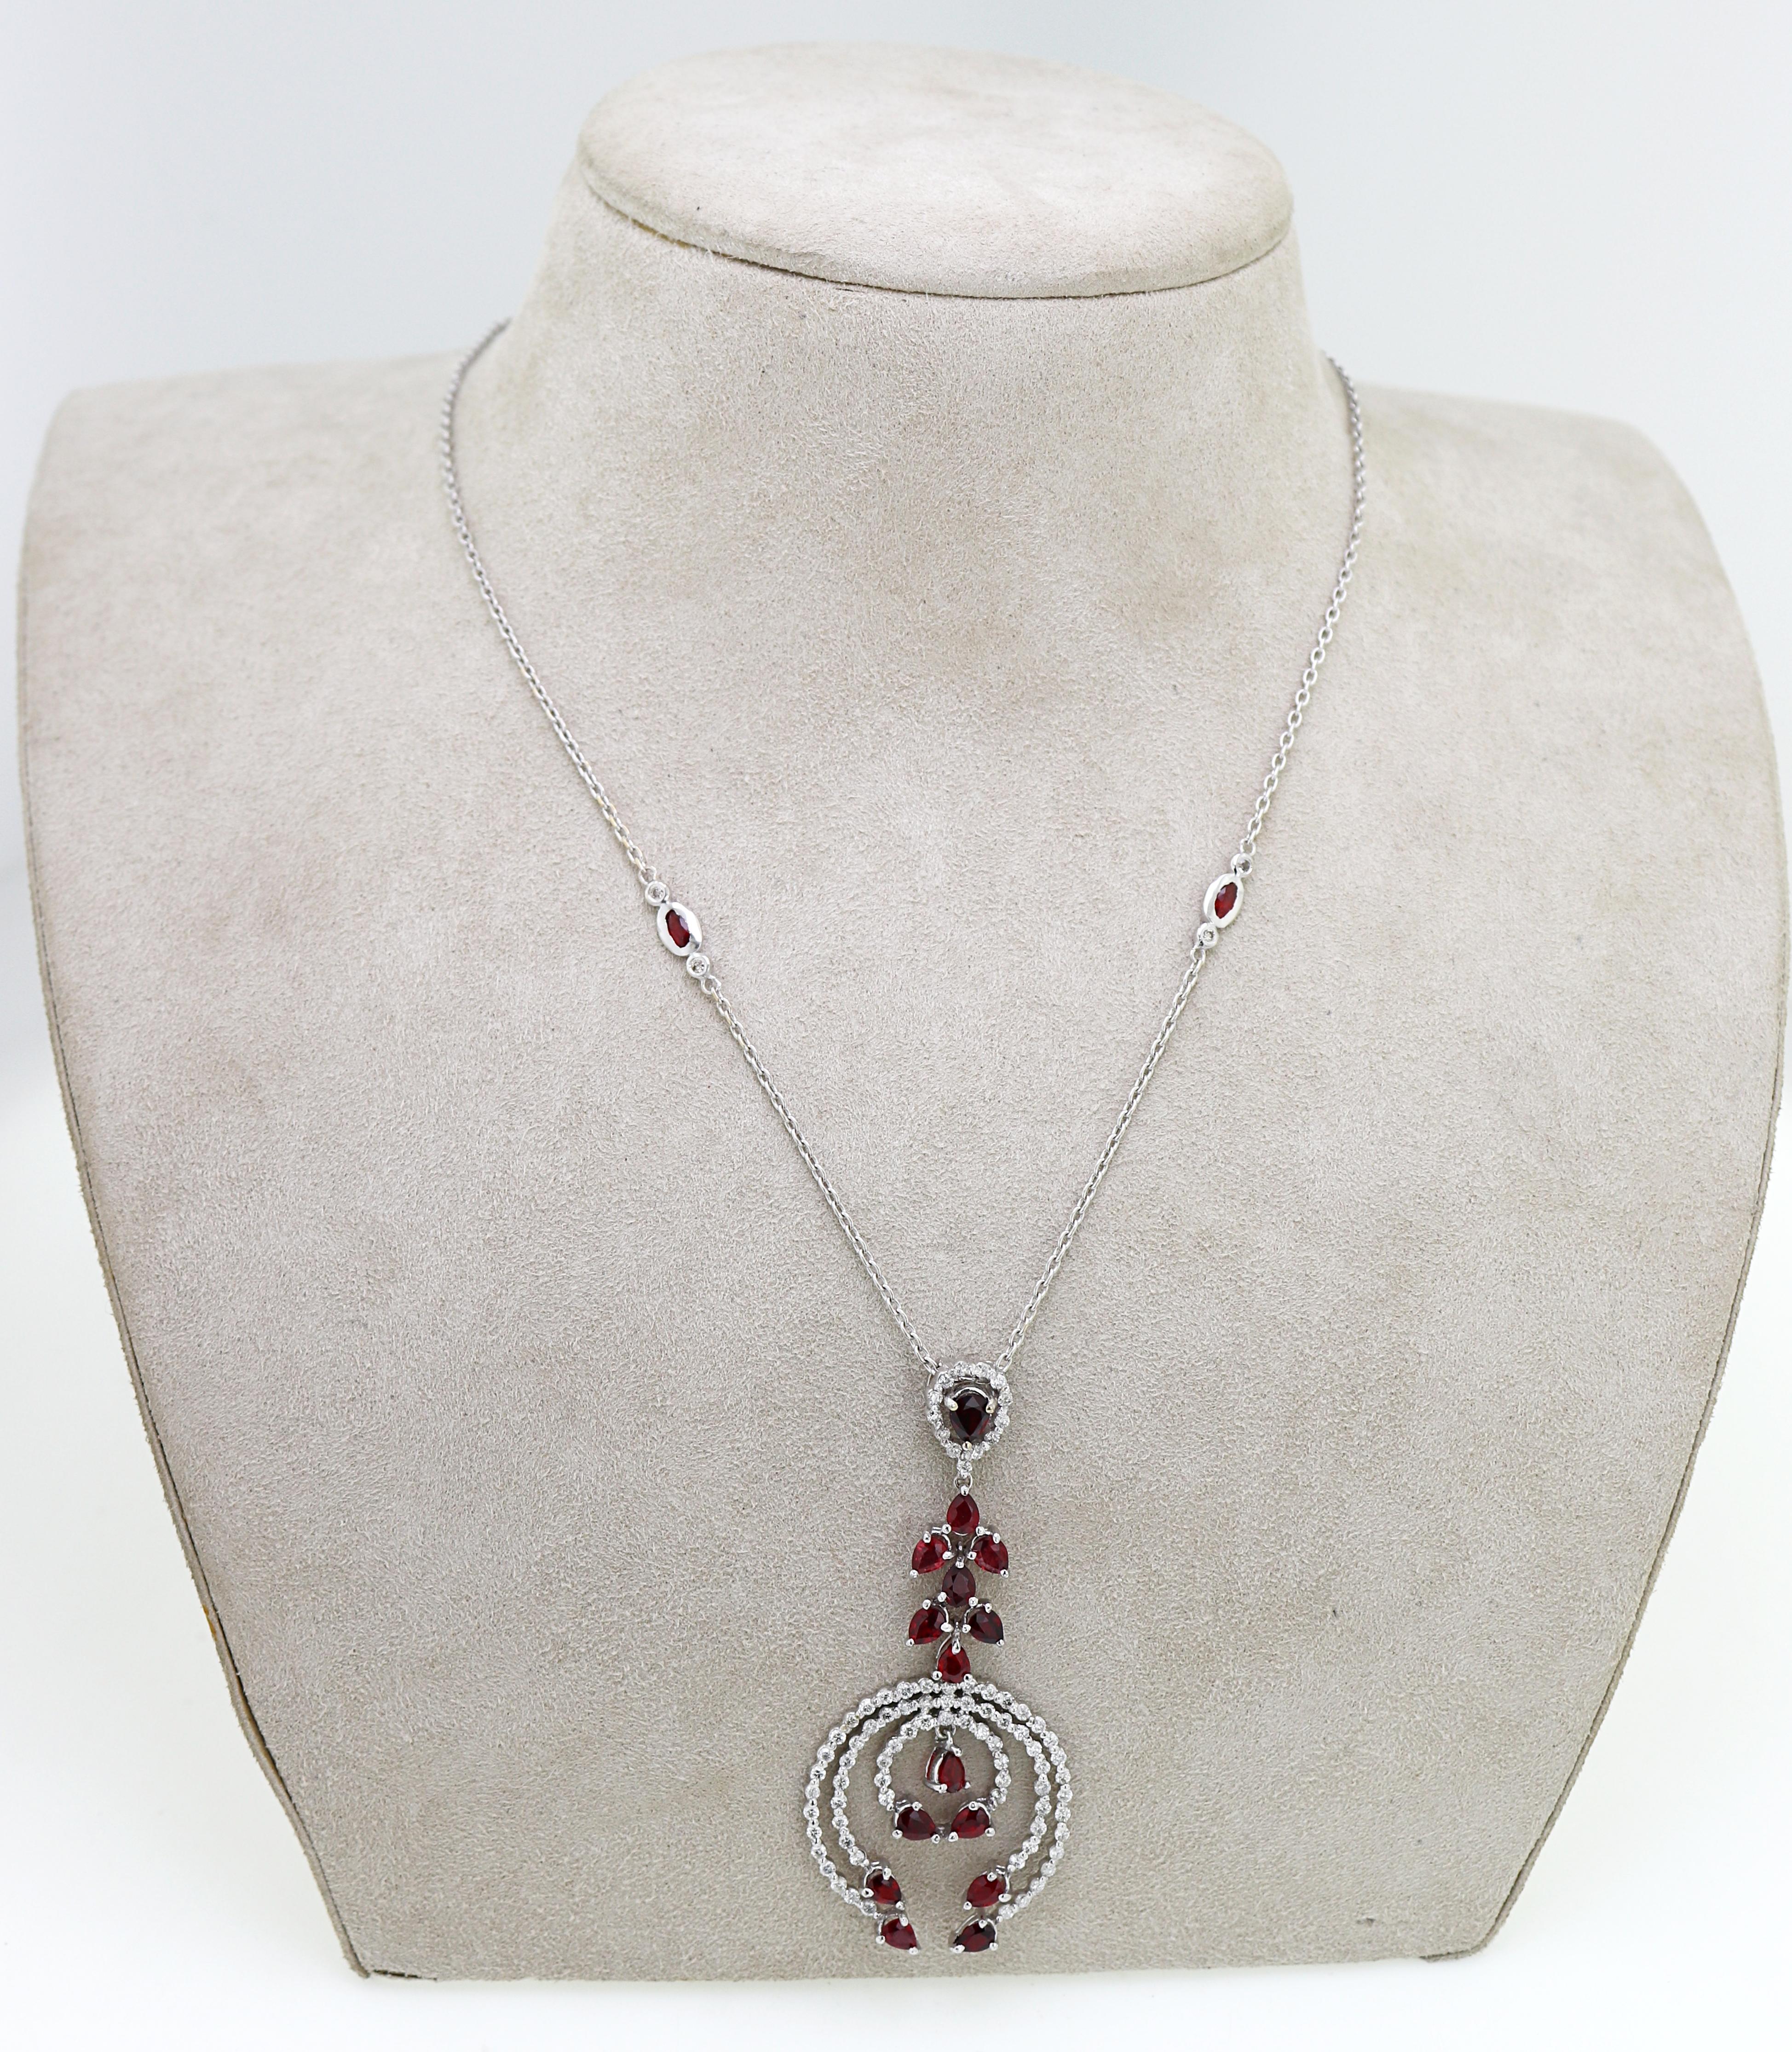 Featuring (4) marquise and (15) pear-cut vivid red rubies, 3.60 cts. tw.,
accented by (68) full-cut diamonds, 1.50 cts. tw., SI-I, I-J, prong set in an
18k white gold articulated “triple naja” style drop pendant, 58.9 X 25 X 3.6
mm, suspending from